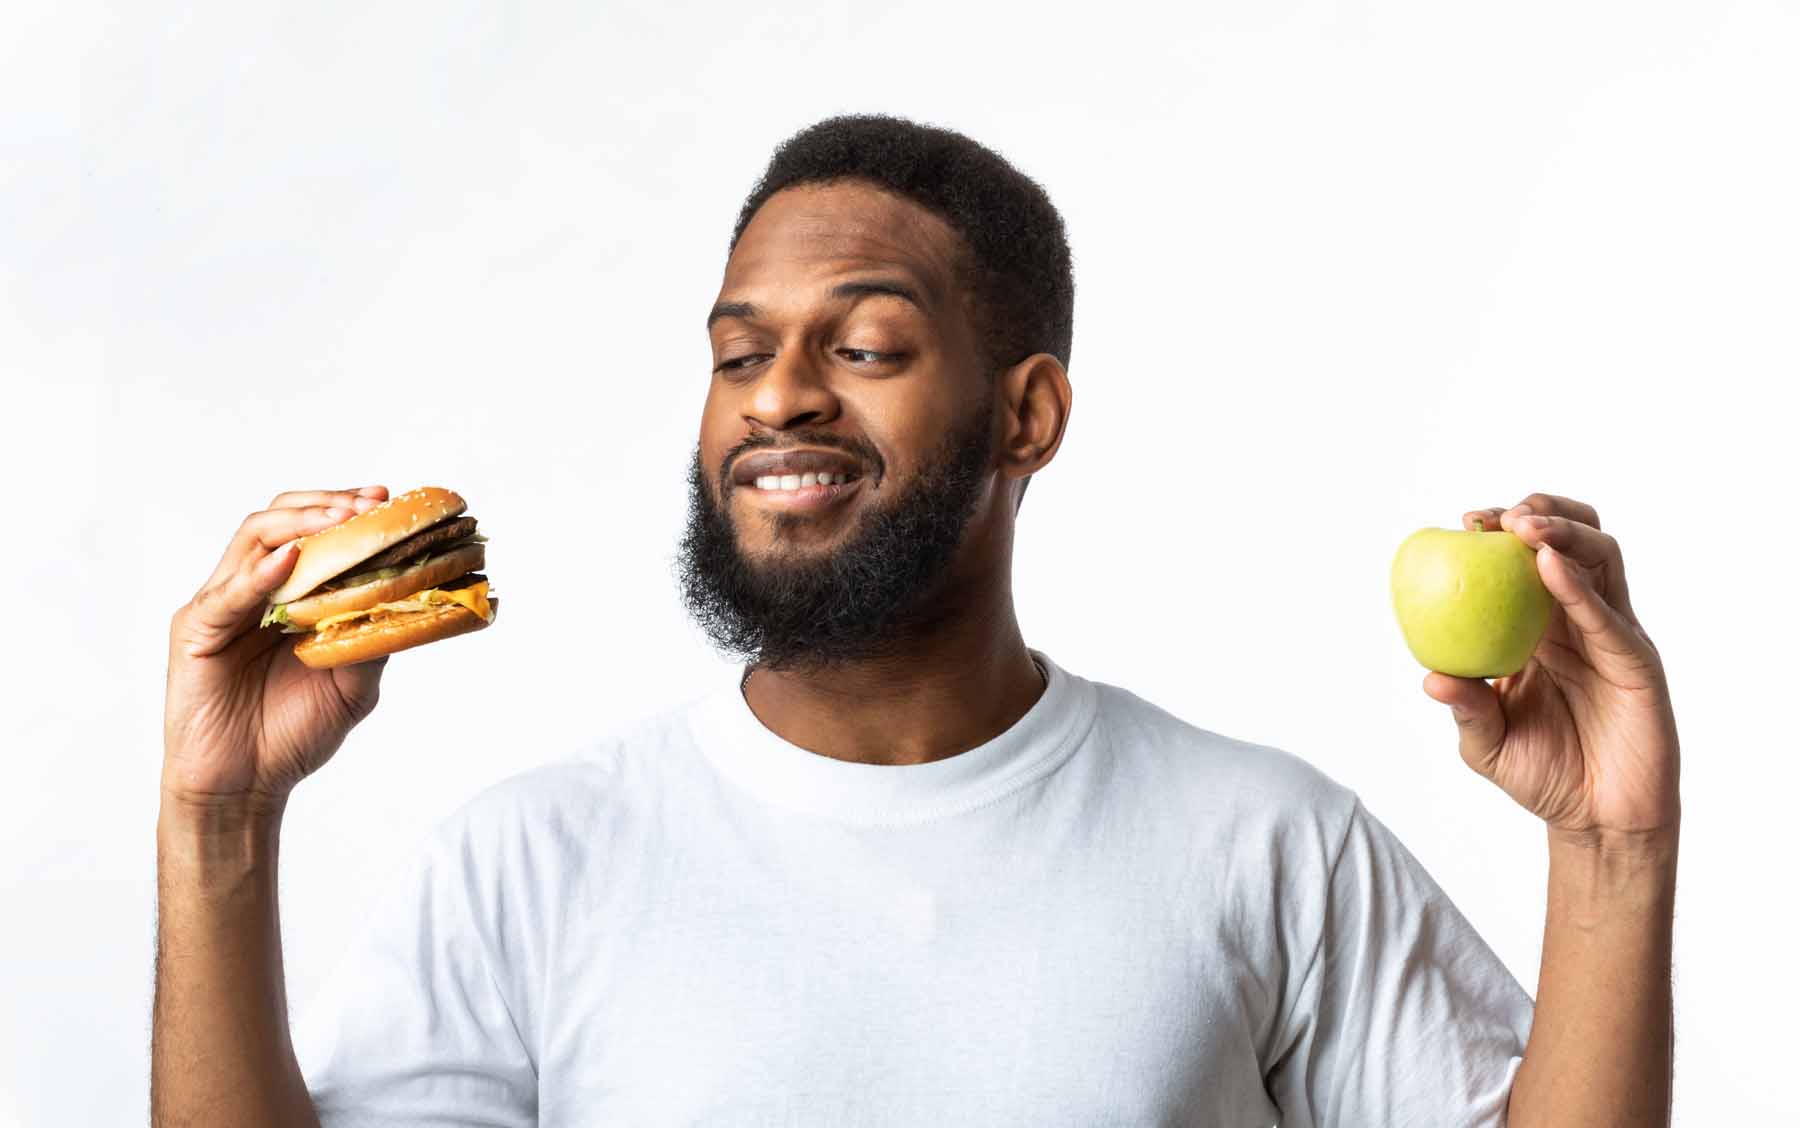 Healthy Vs Unhealthy Food. Hungry African Man Choosing Between Burger And Apple Standing In Studio Over White Background. Cheat Meal On A Diet, Male Nutrition And Junk Food Concept